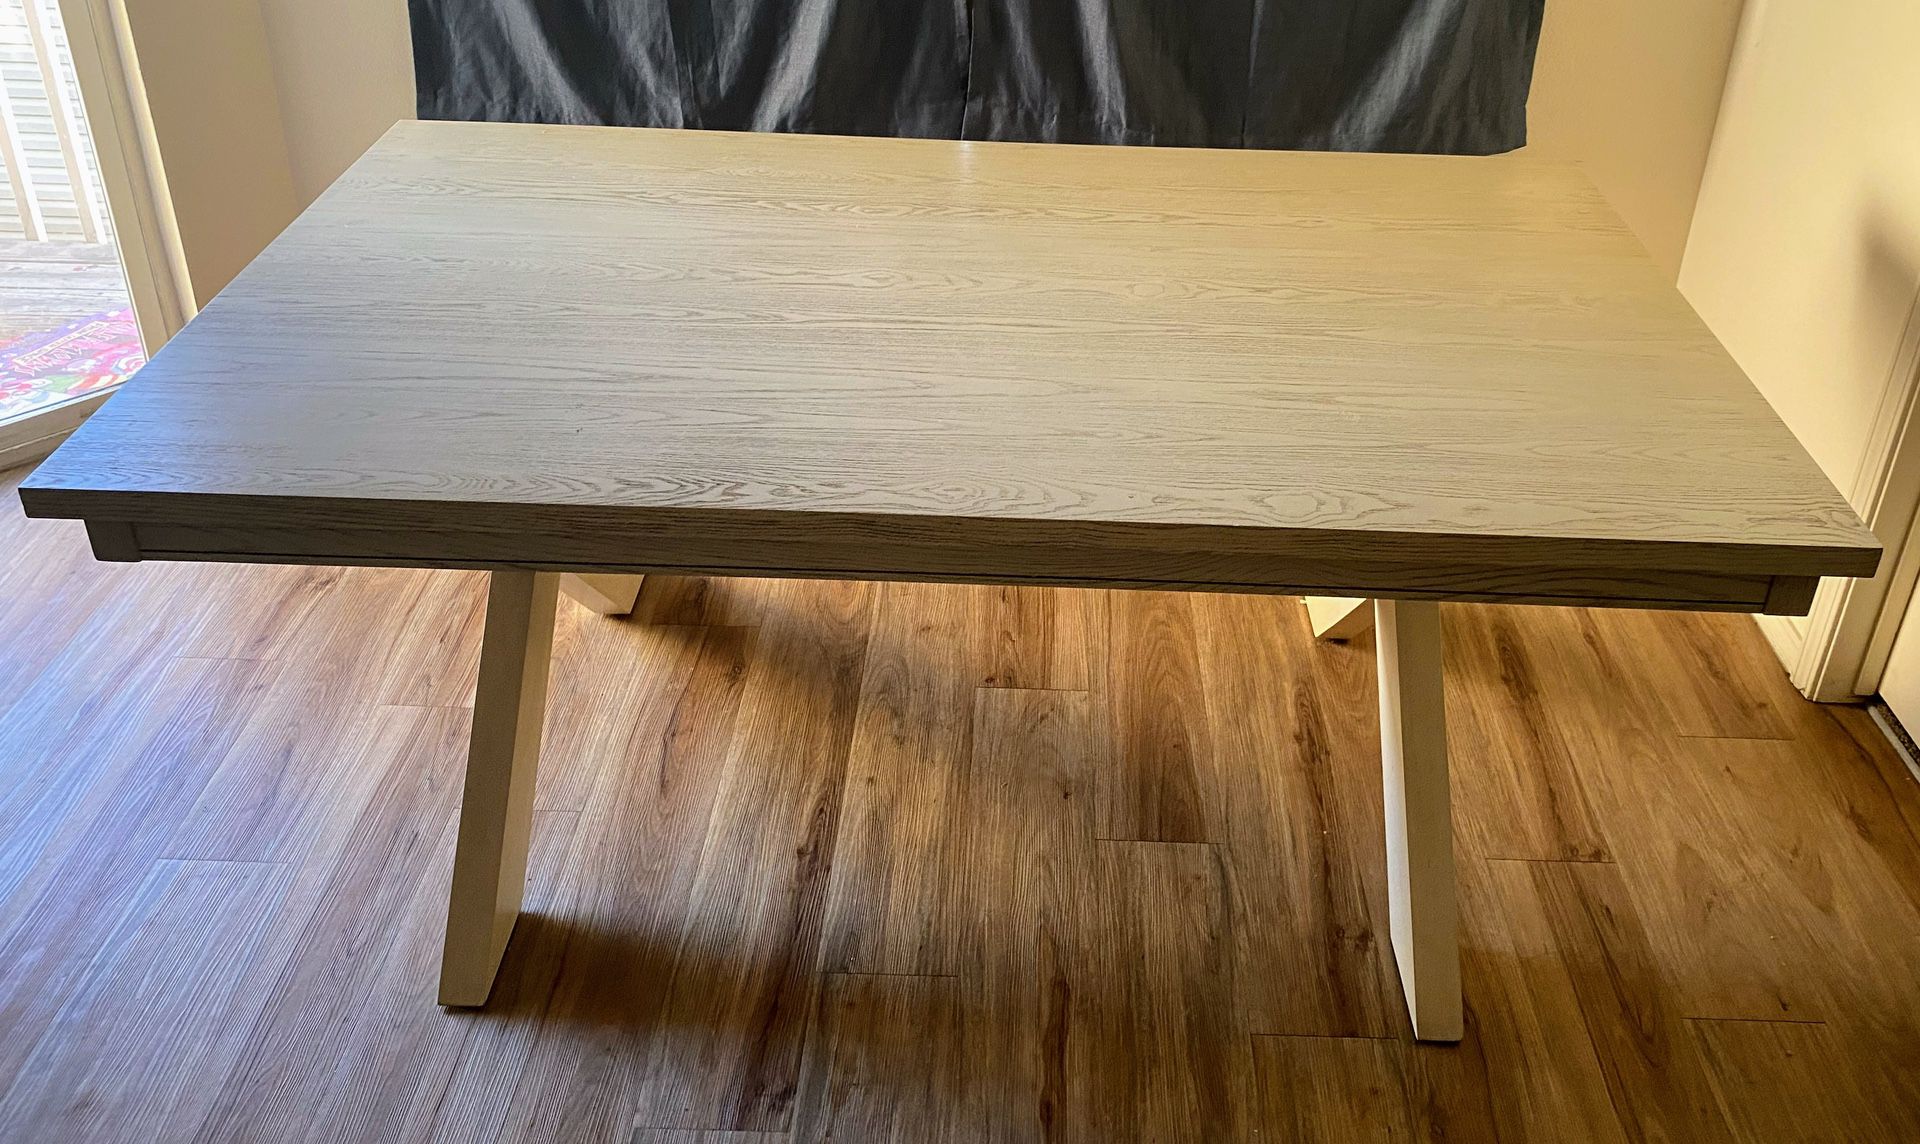 Dining Room Table $150